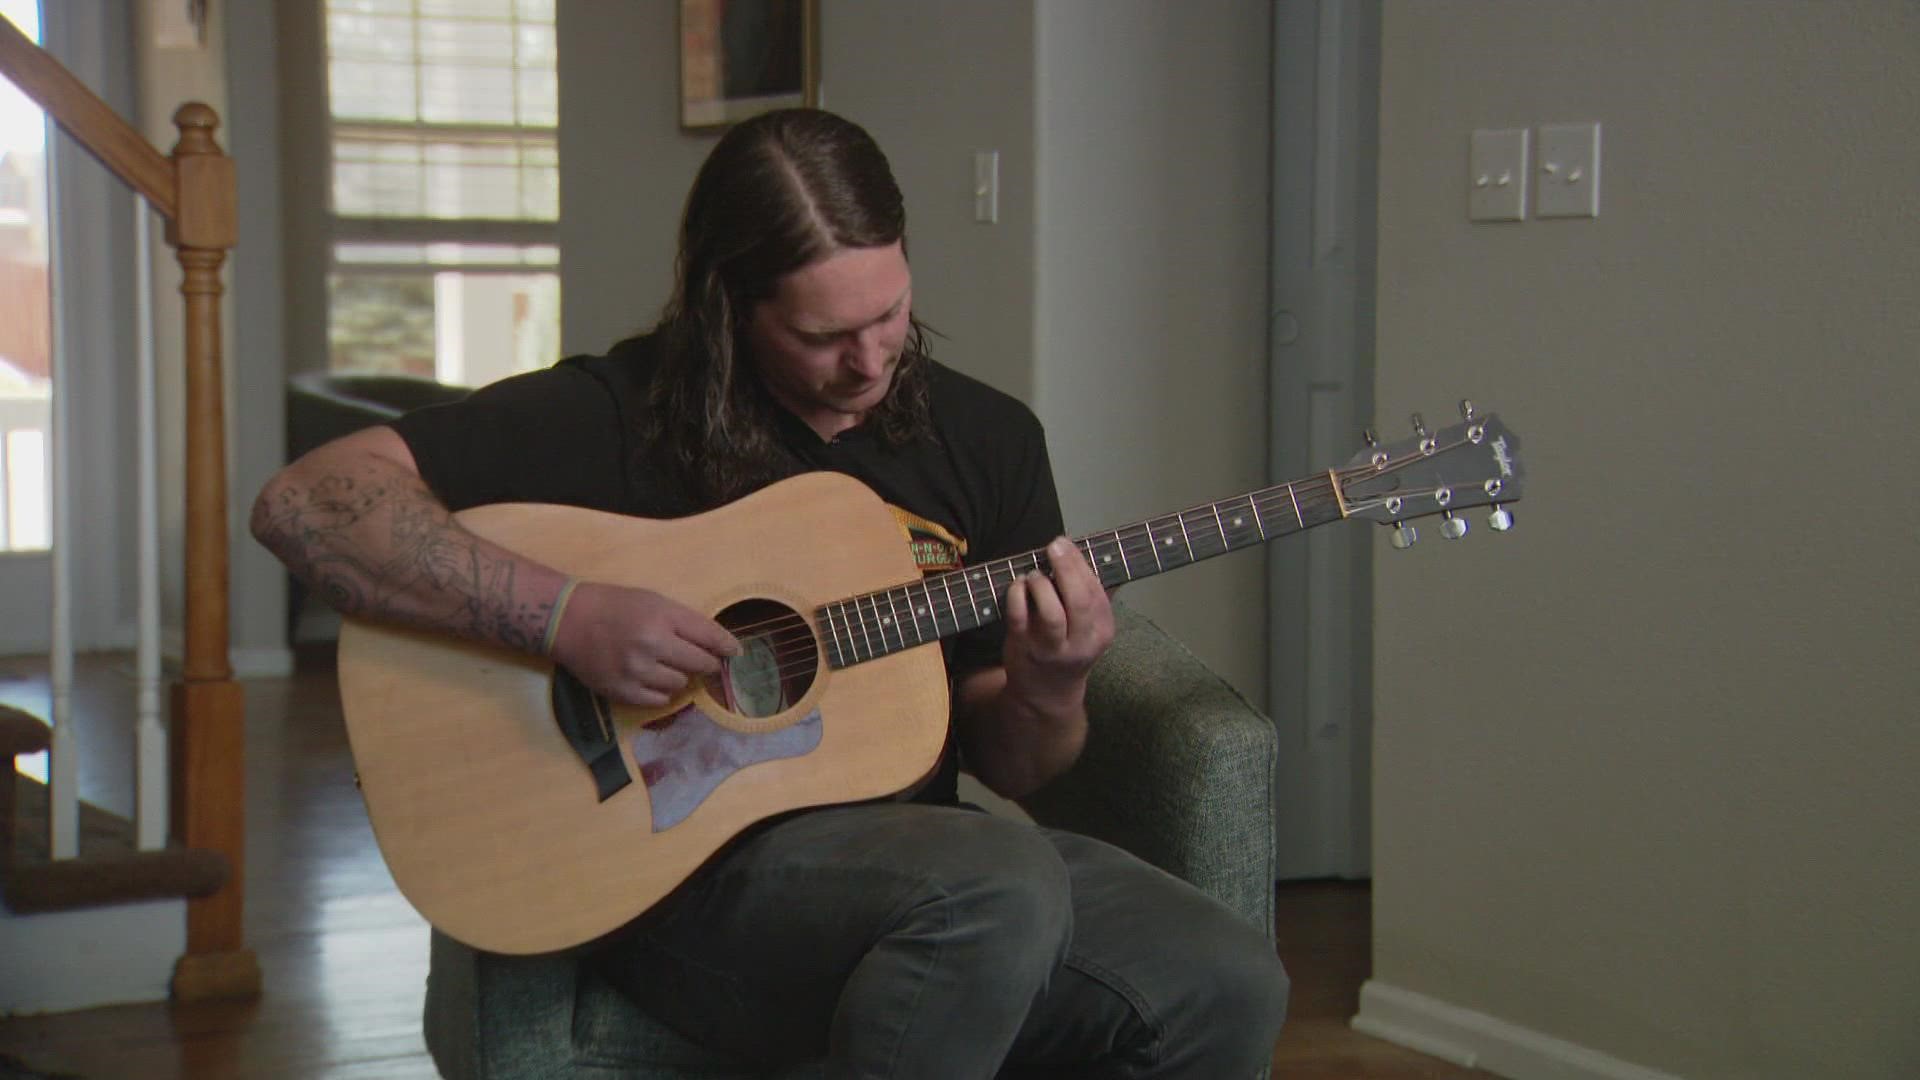 A Colorado musician is in recovery after 5 fentanyl overdoses. The survivor details how music has helped in his recovery from drug addiction.